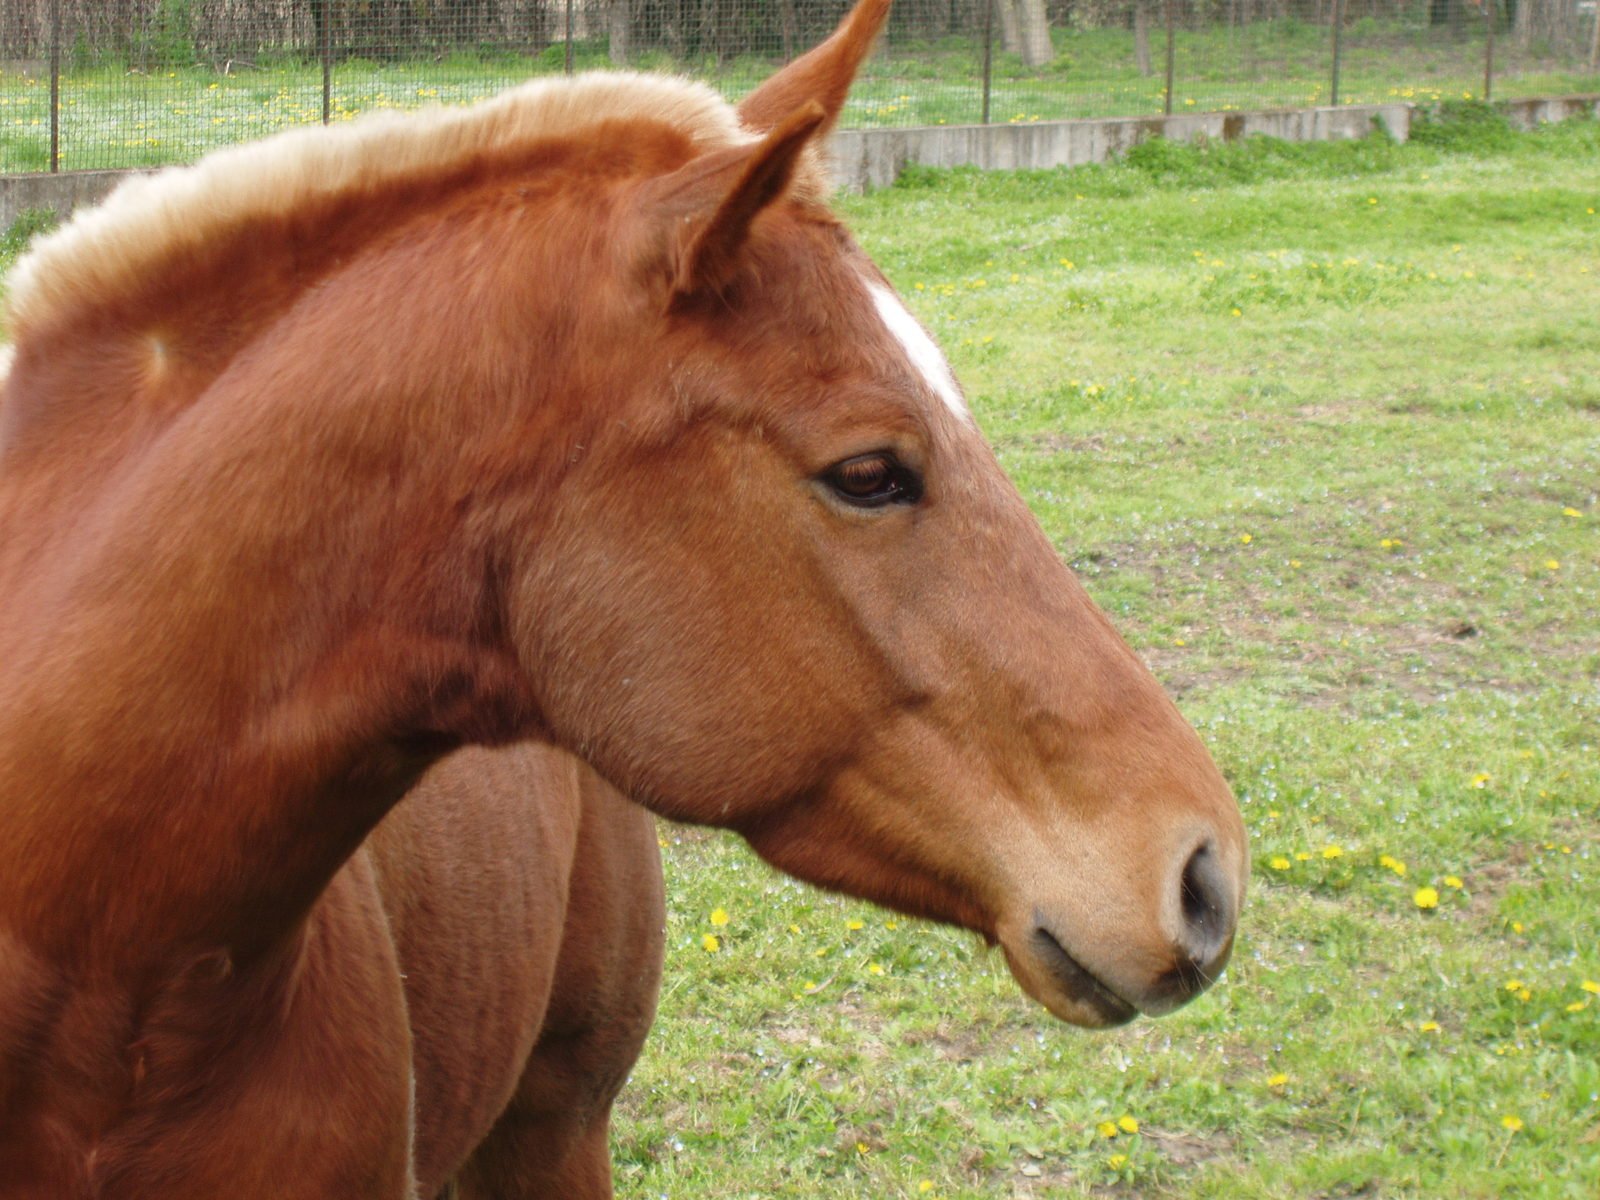 a brown horse with white patches on its face standing in a field